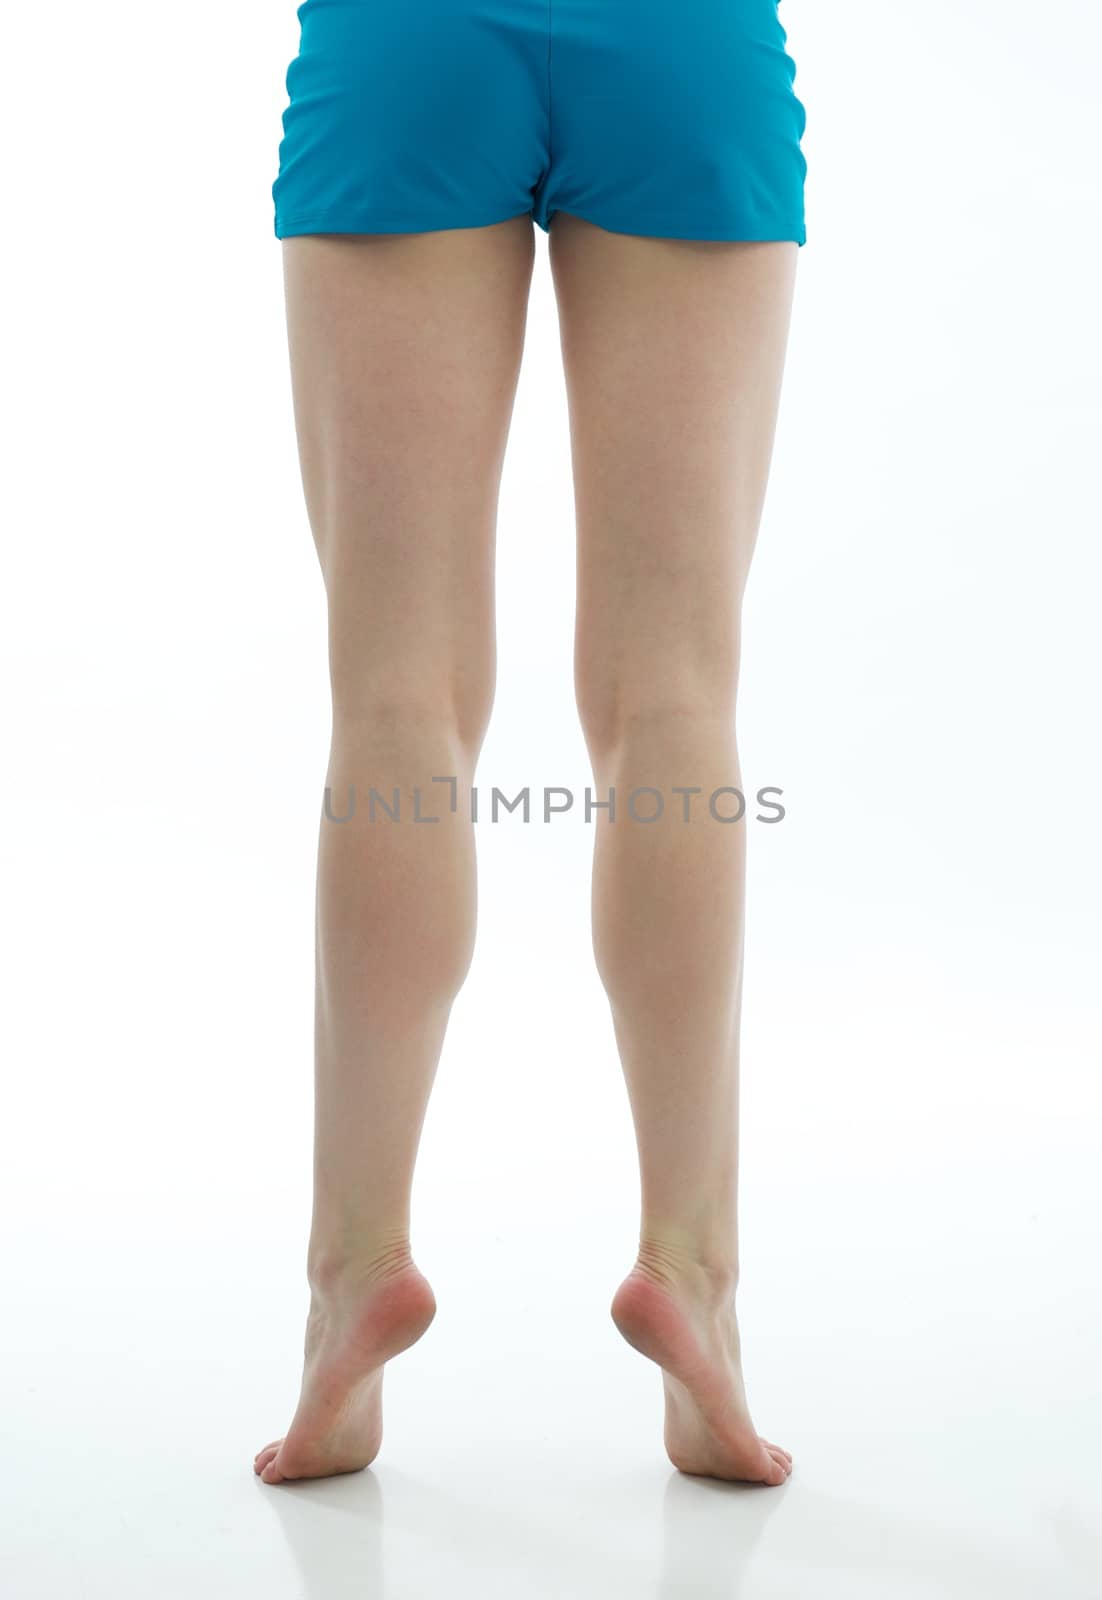 Dancer's Muscular Legs with Blue Shorts by pixelsnap